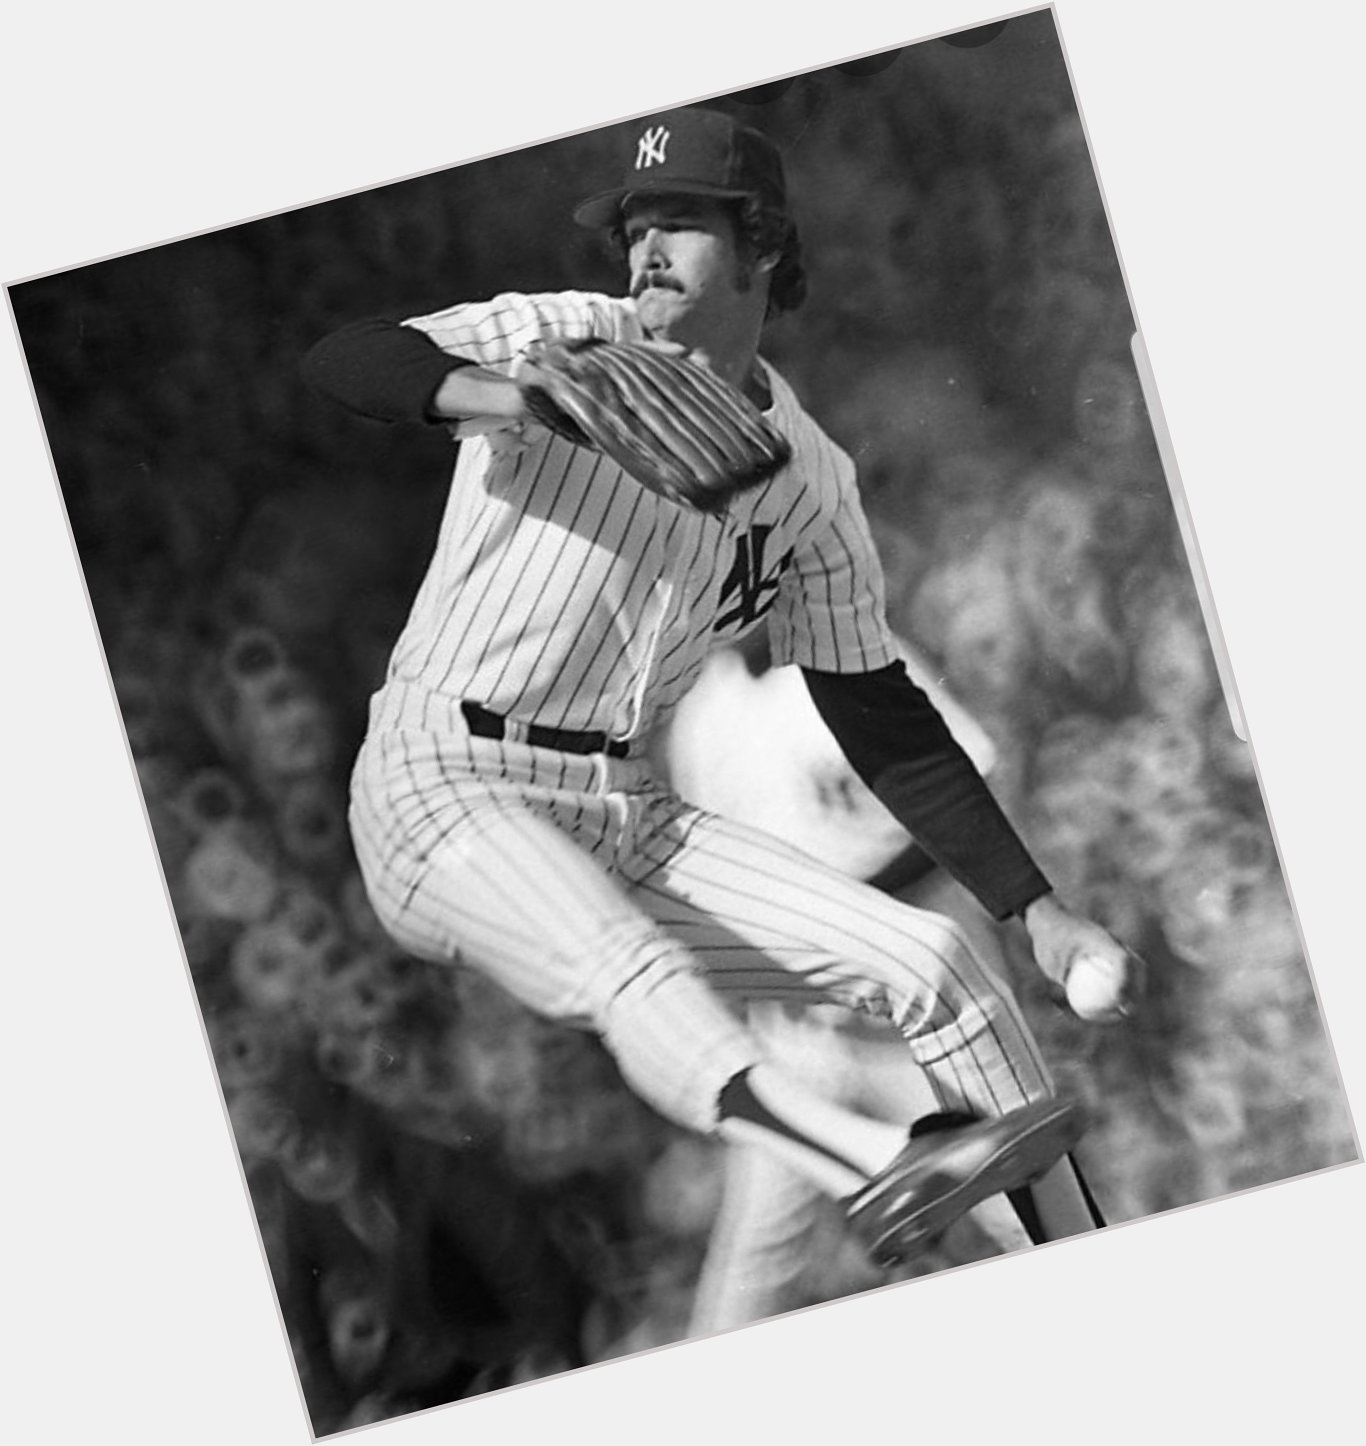 Happy birthday to one of my all-time favorite Yankees, Louisiana Lightning Ron Guidry 